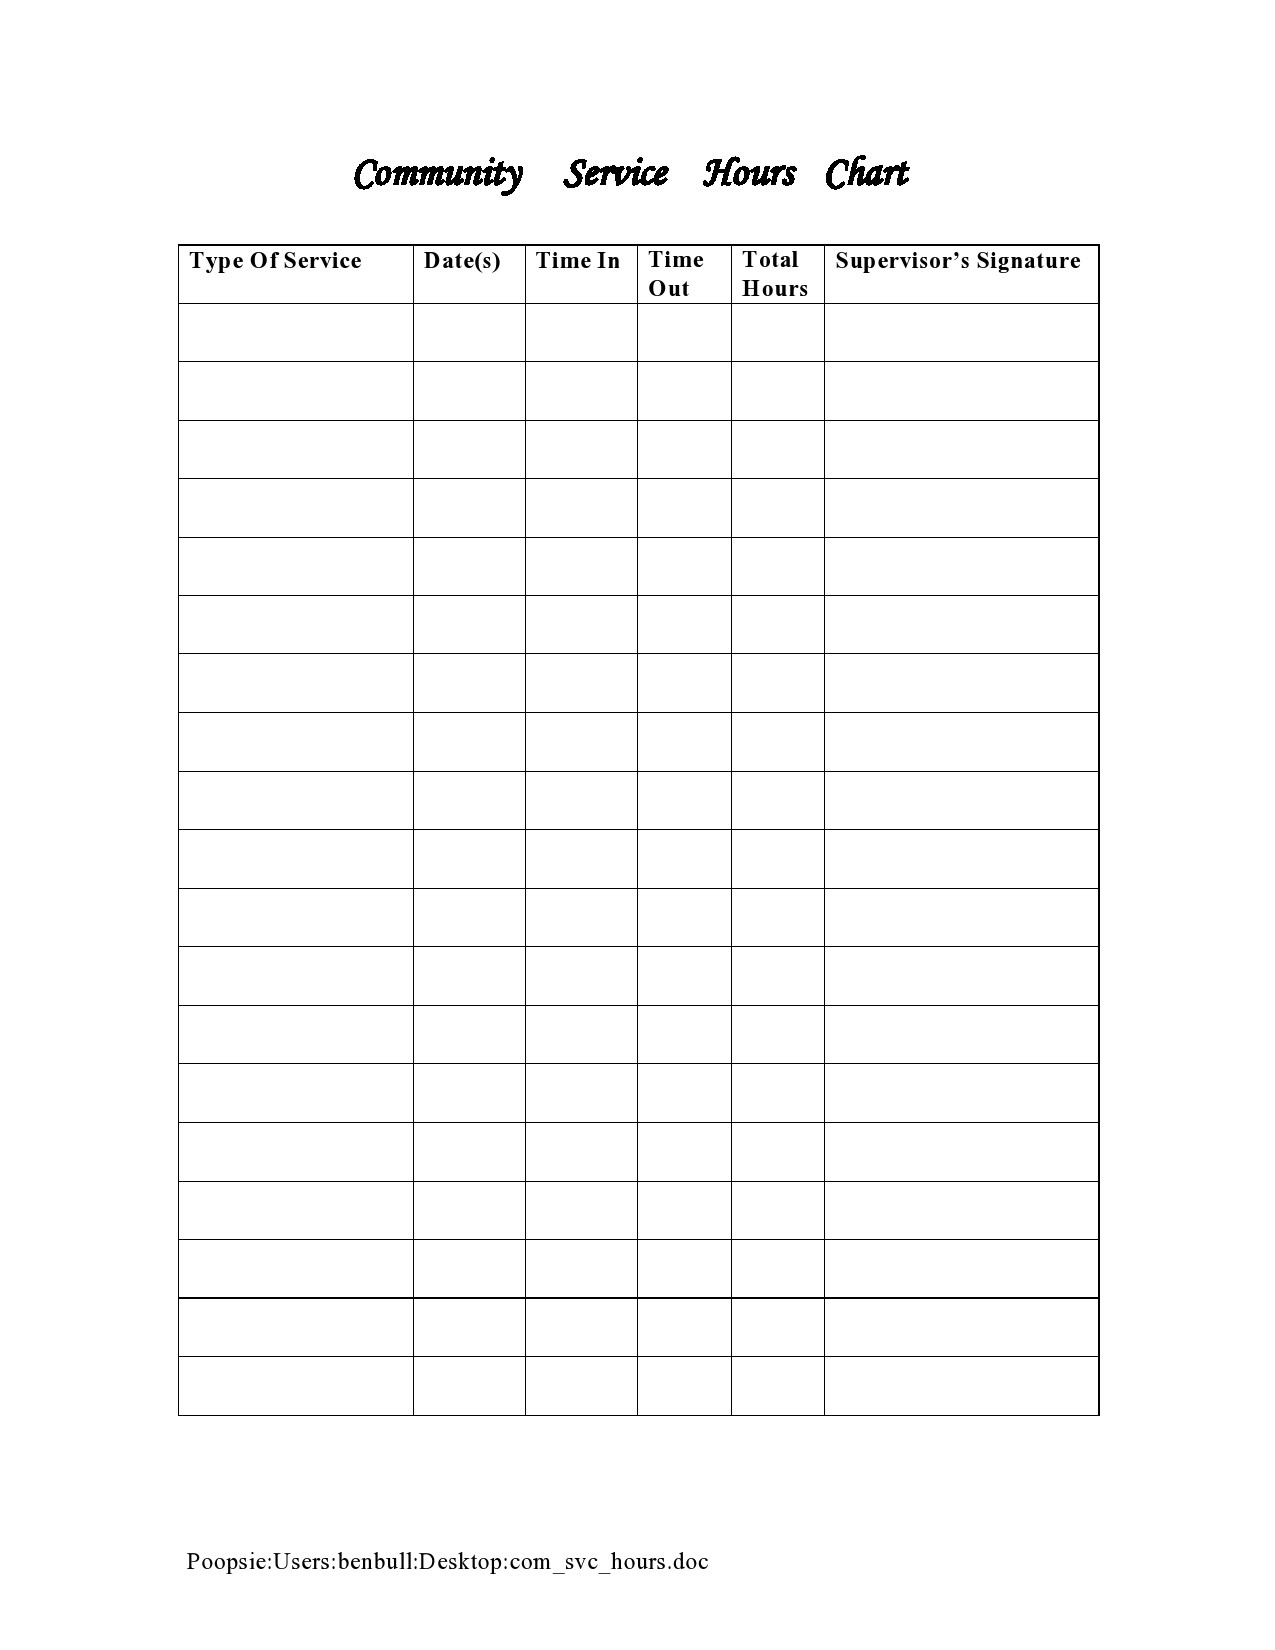 fillable-community-service-form-printable-forms-free-online